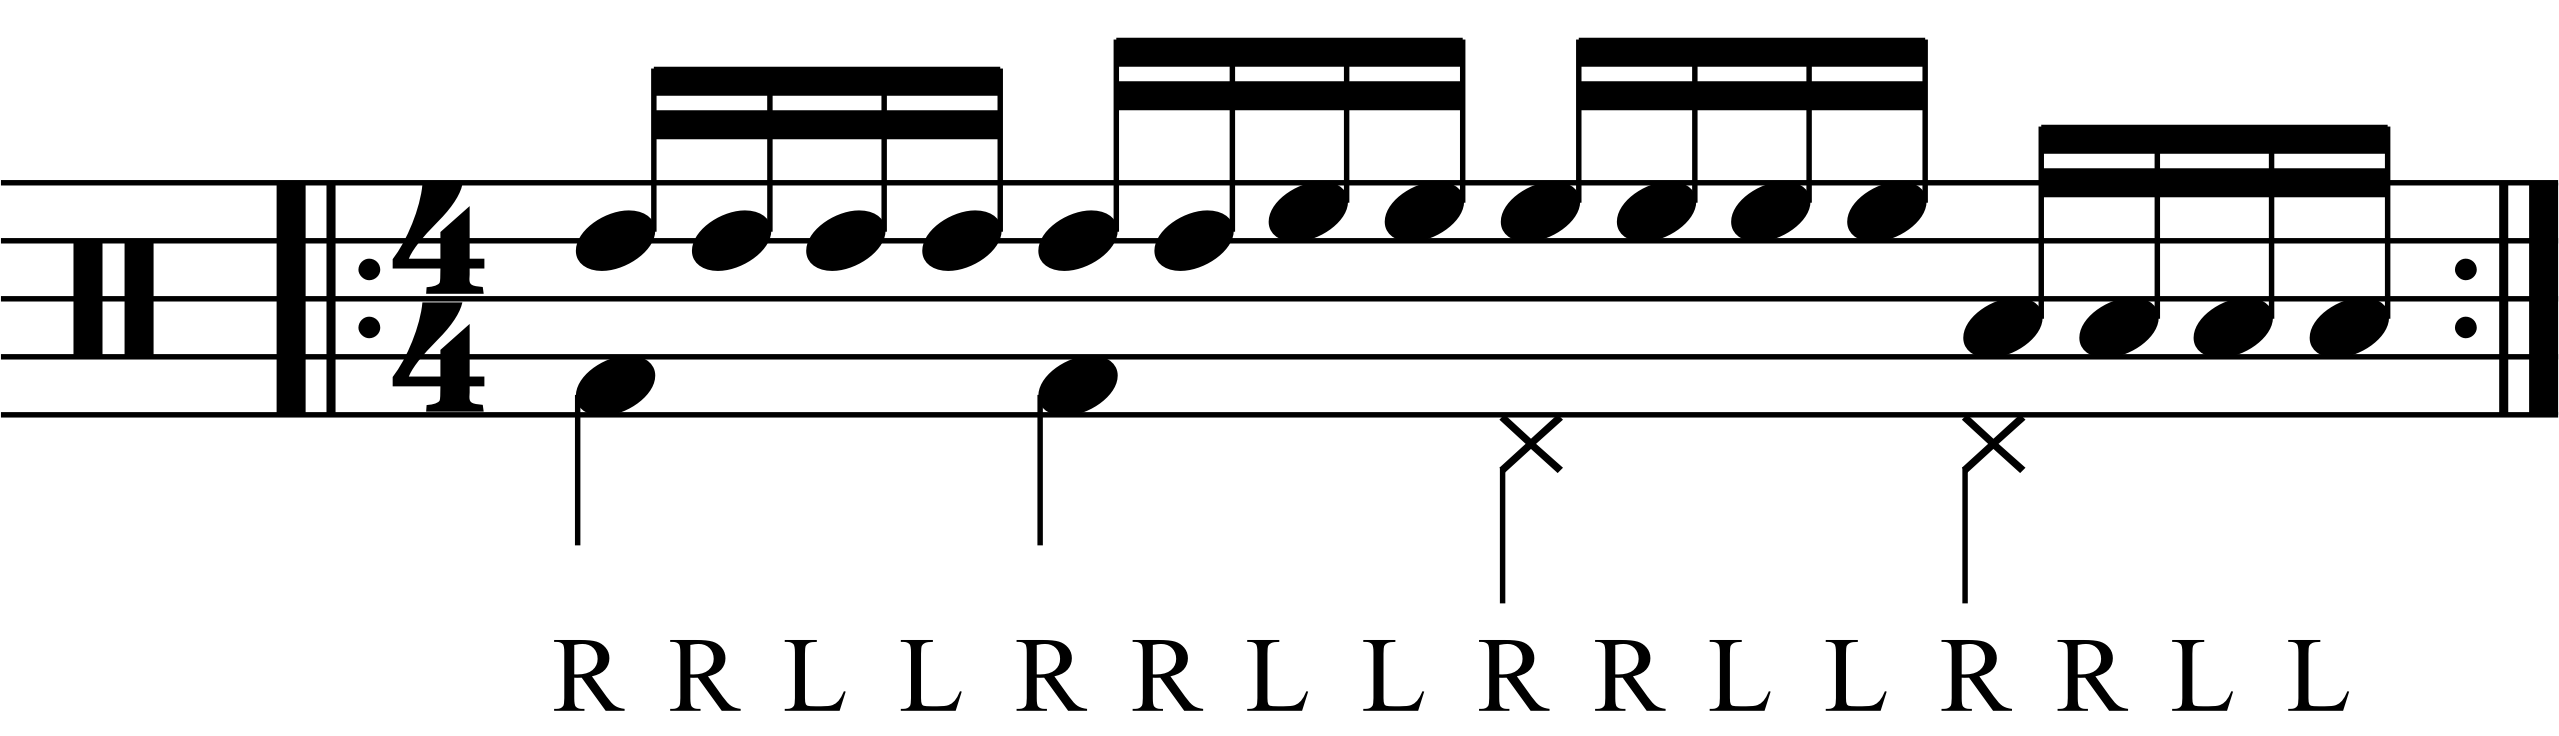 Double stroke roll played as groups of six